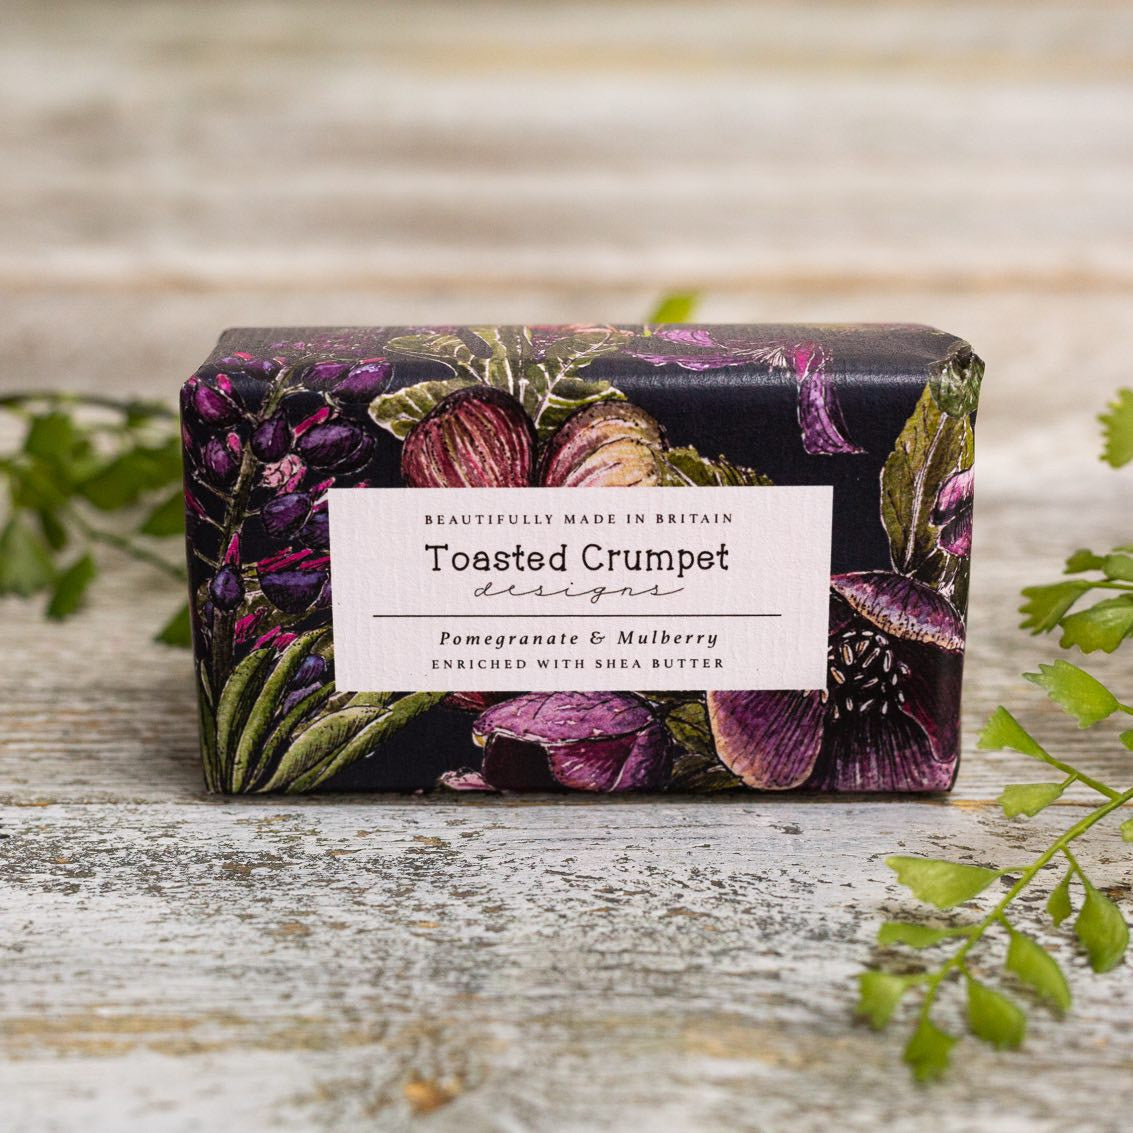 Pomegranate & Mulberry Soap by Toasted Crumpet.